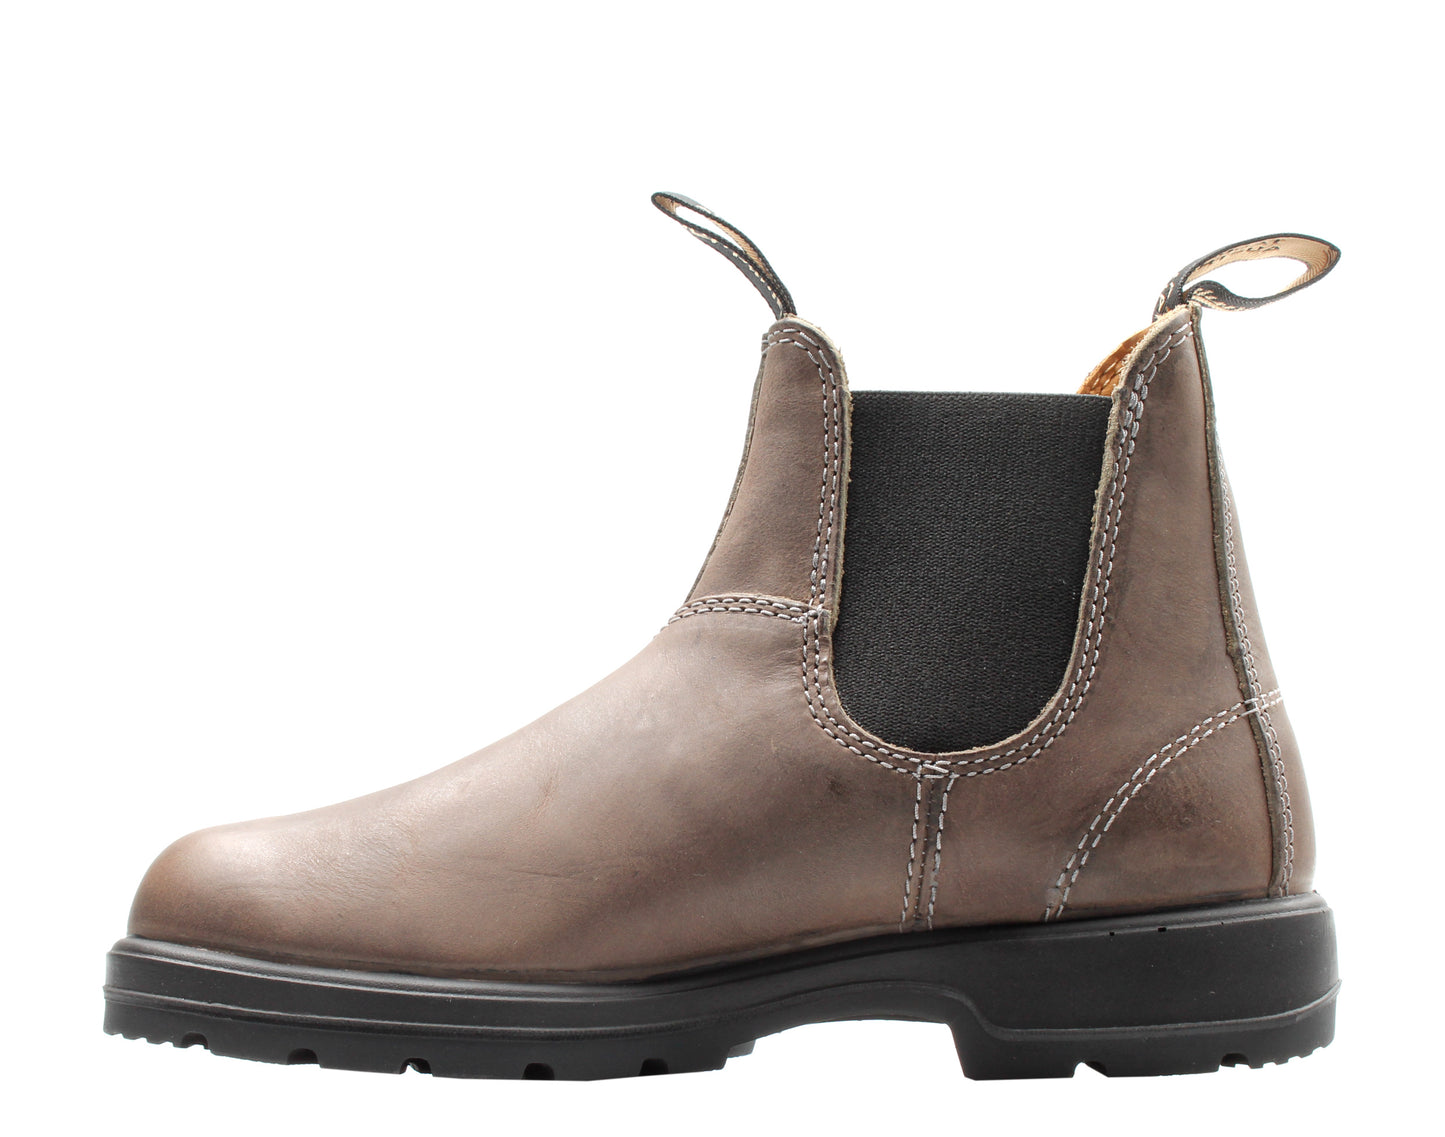 Blundstone 1469 Classic Chelsea Boots Steel Grey/Black Pull-On Adult BL1469